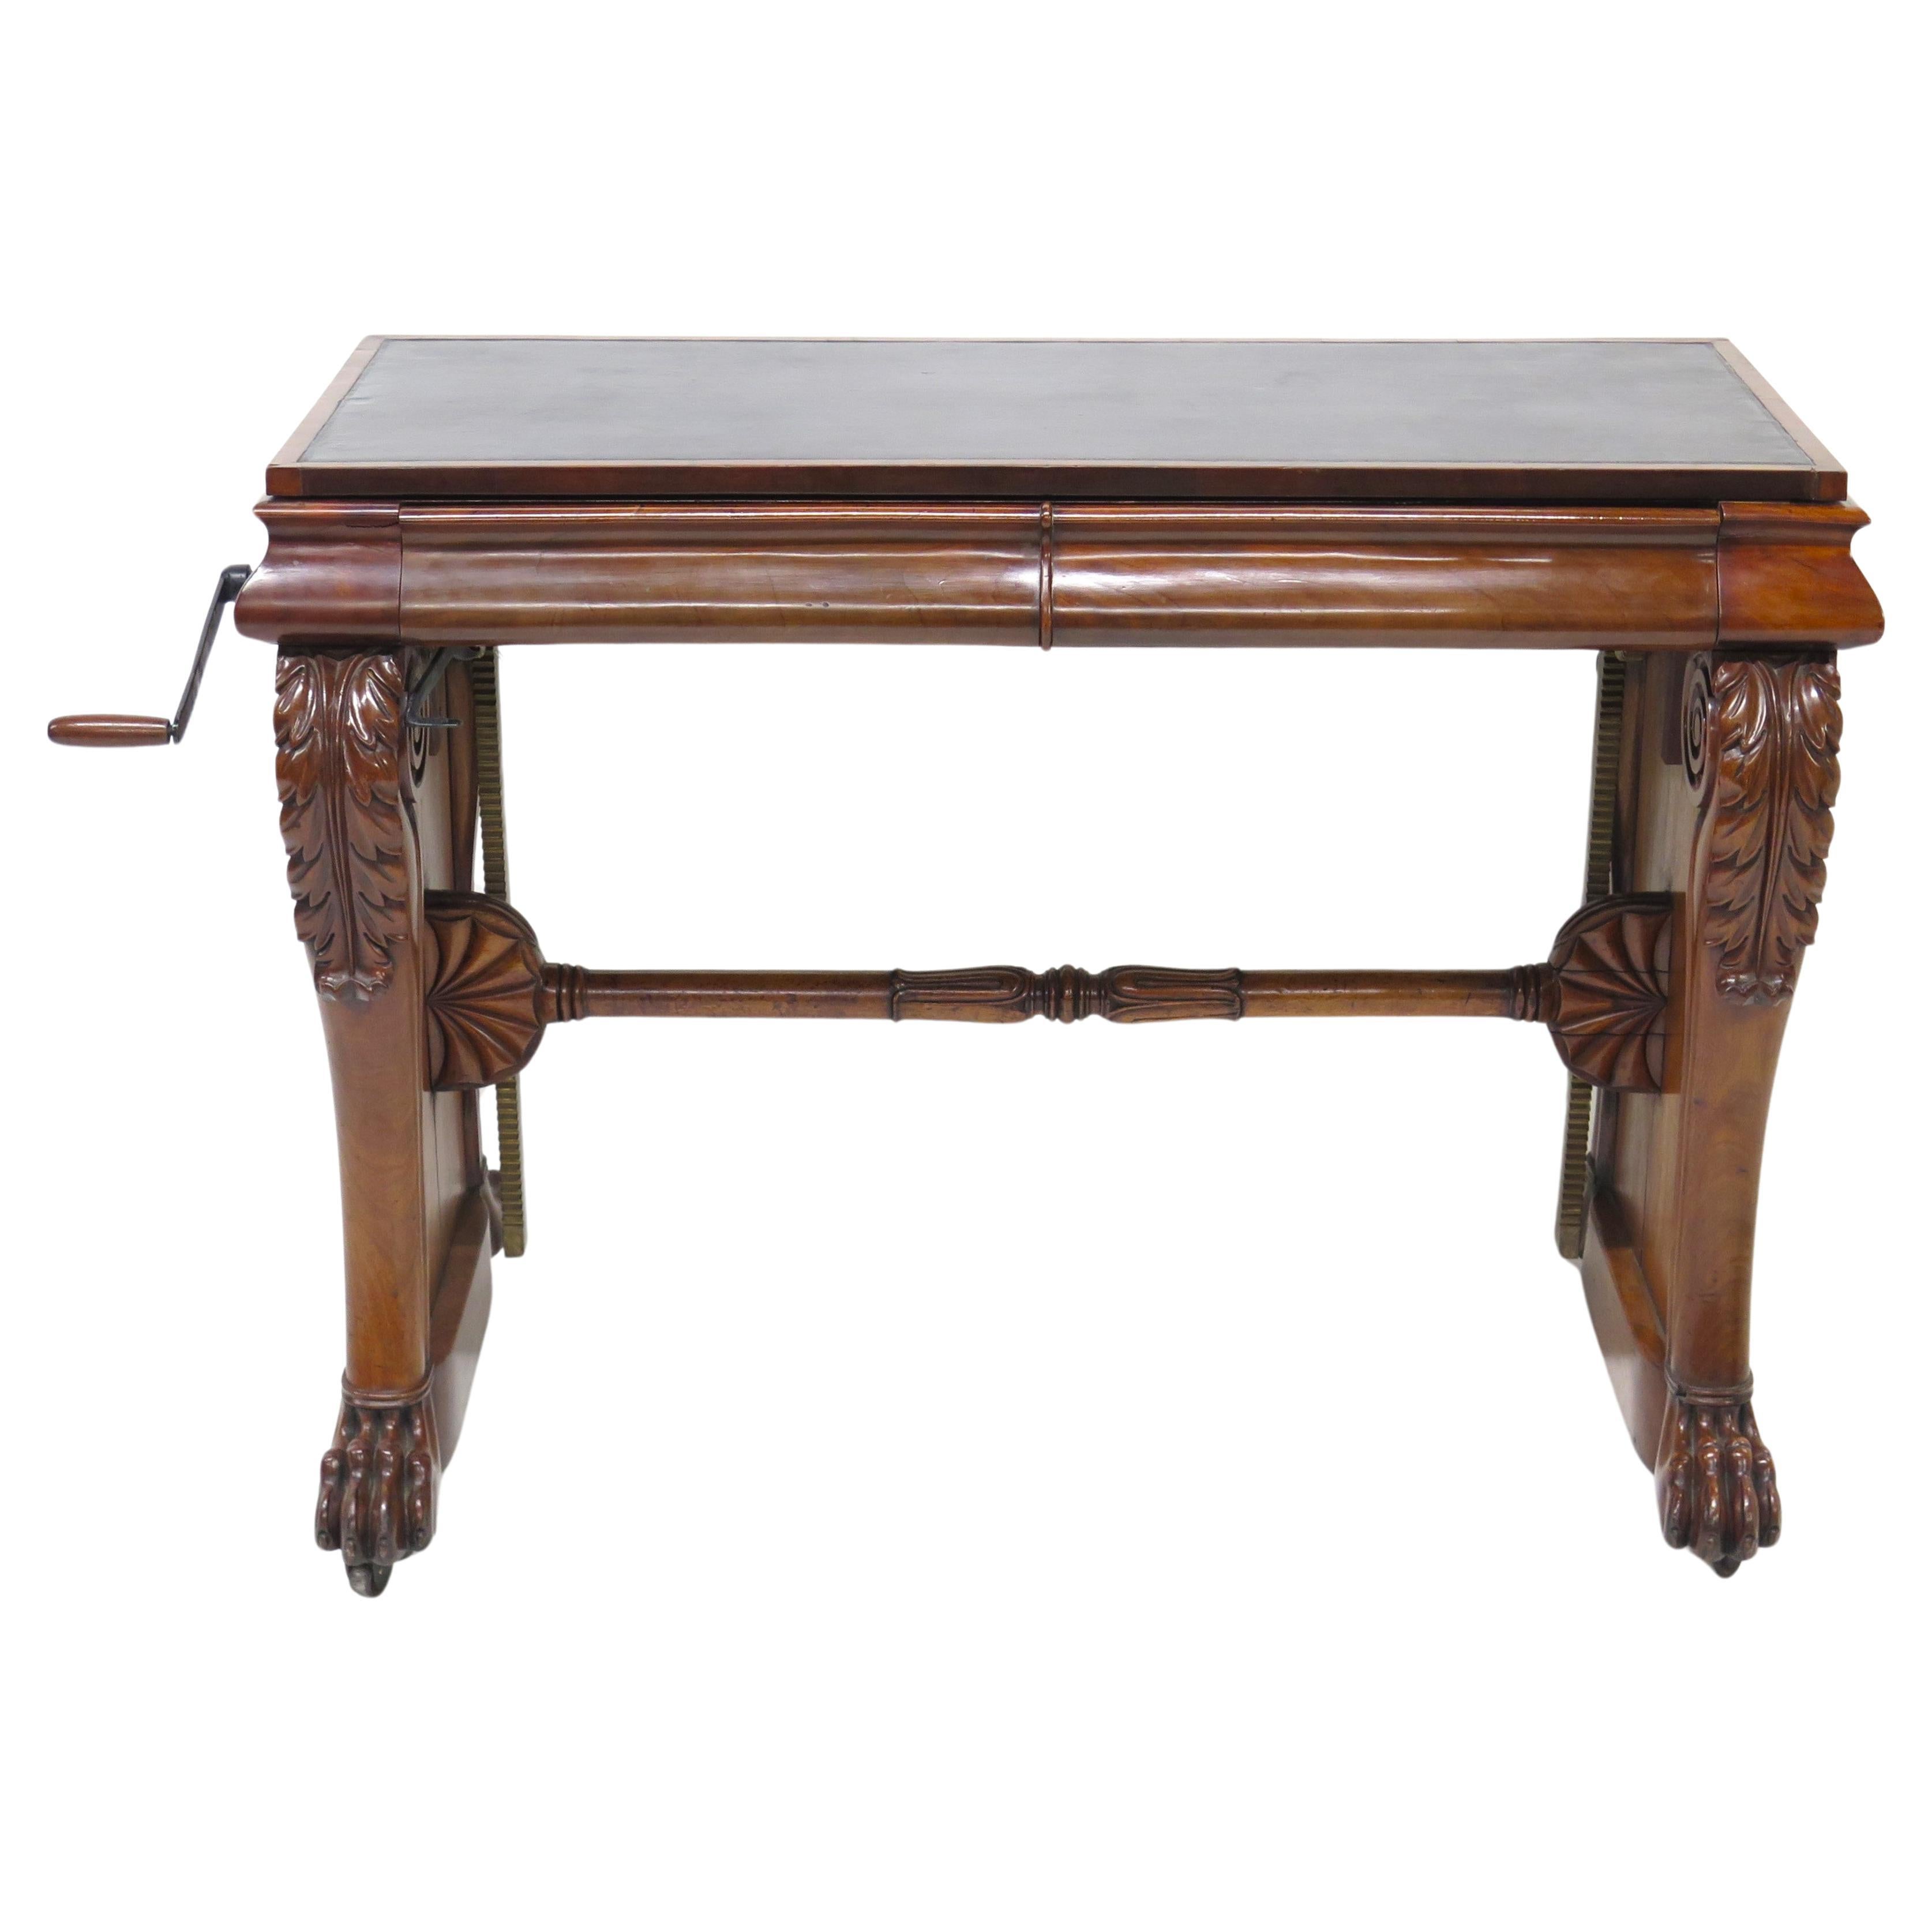 William IV Mahogany Stretcher Based Library Table with Black Leather Top